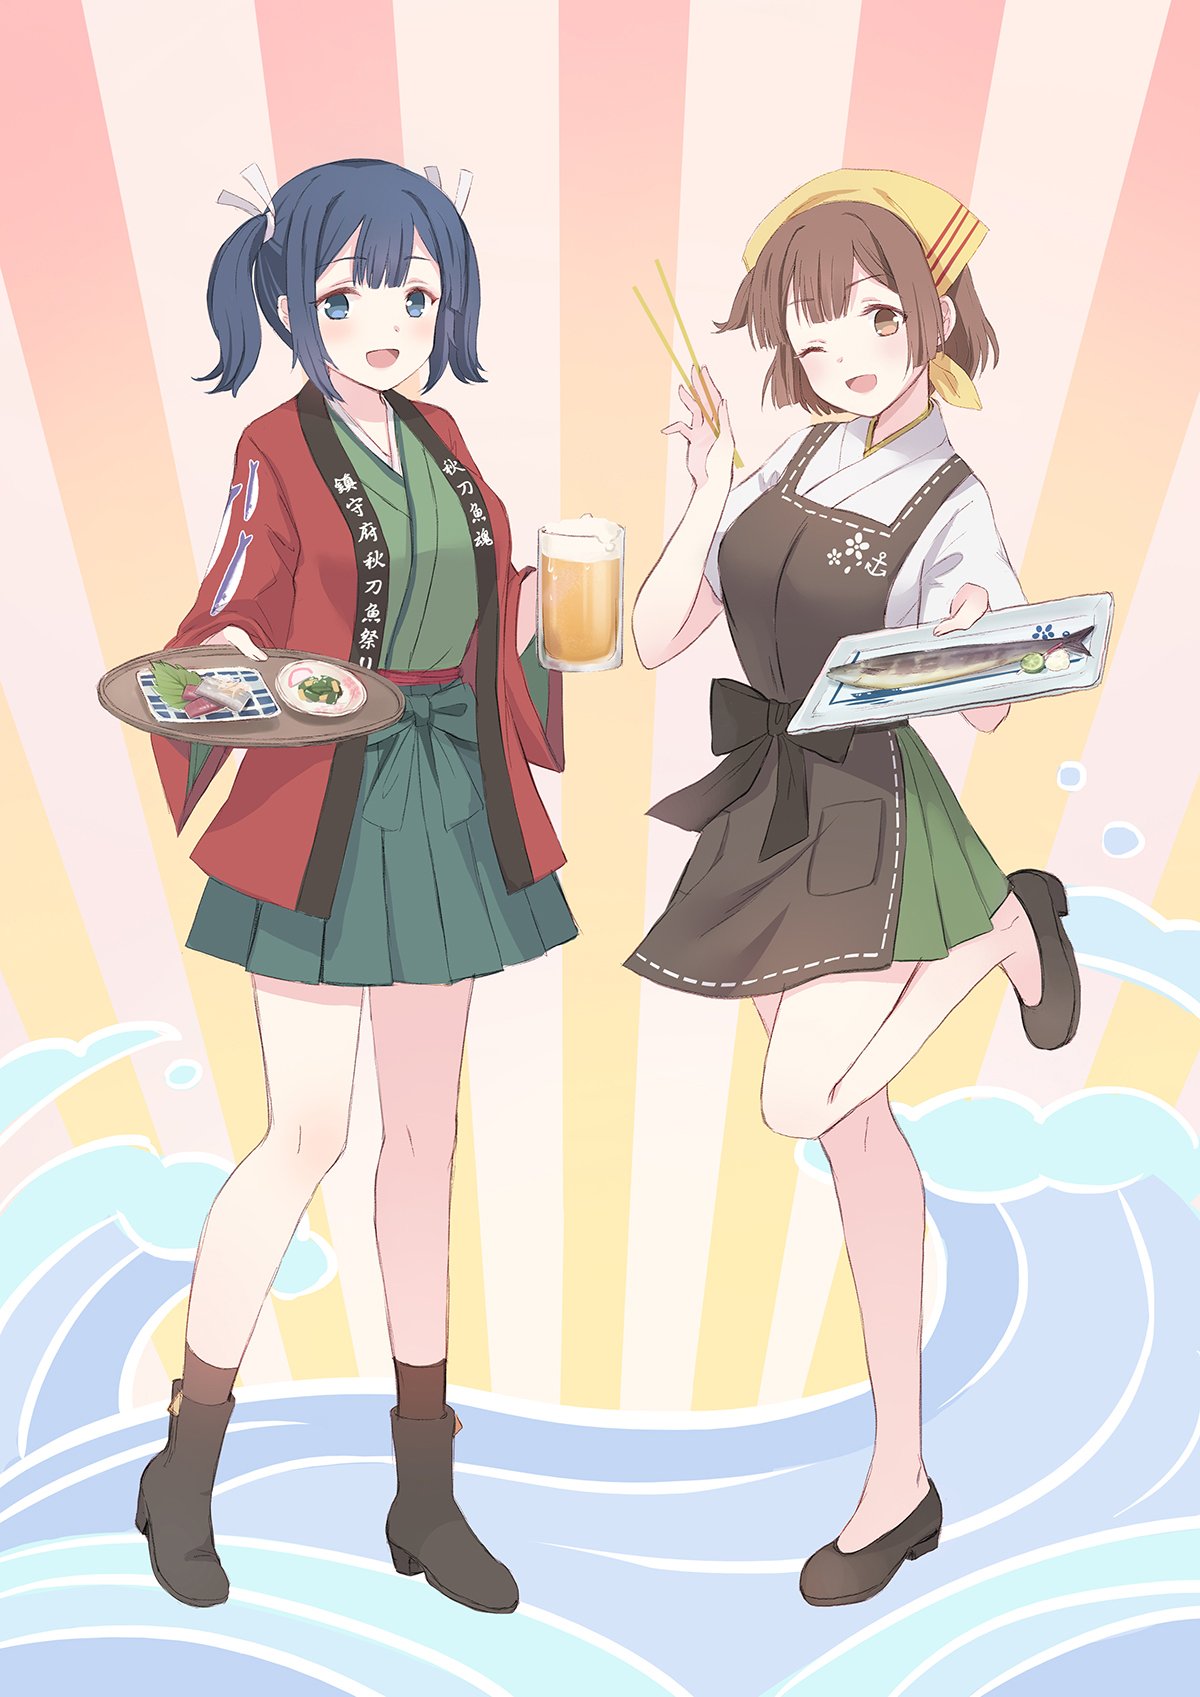 2girls alcohol apron bangs beer beer_mug blue_eyes blue_hair blush boots breasts brown_eyes brown_hair chopsticks commentary_request cup emia_wang eyebrows_visible_through_hair fish food full_body hair_between_eyes hair_ribbon headband highres hiryuu_(kantai_collection) holding holding_cup japanese_clothes kantai_collection leg_up long_sleeves looking_at_viewer medium_breasts multiple_girls one_eye_closed open_mouth ribbon saury shoes short_hair side_ponytail skirt smile souryuu_(kantai_collection) standing twintails water waves